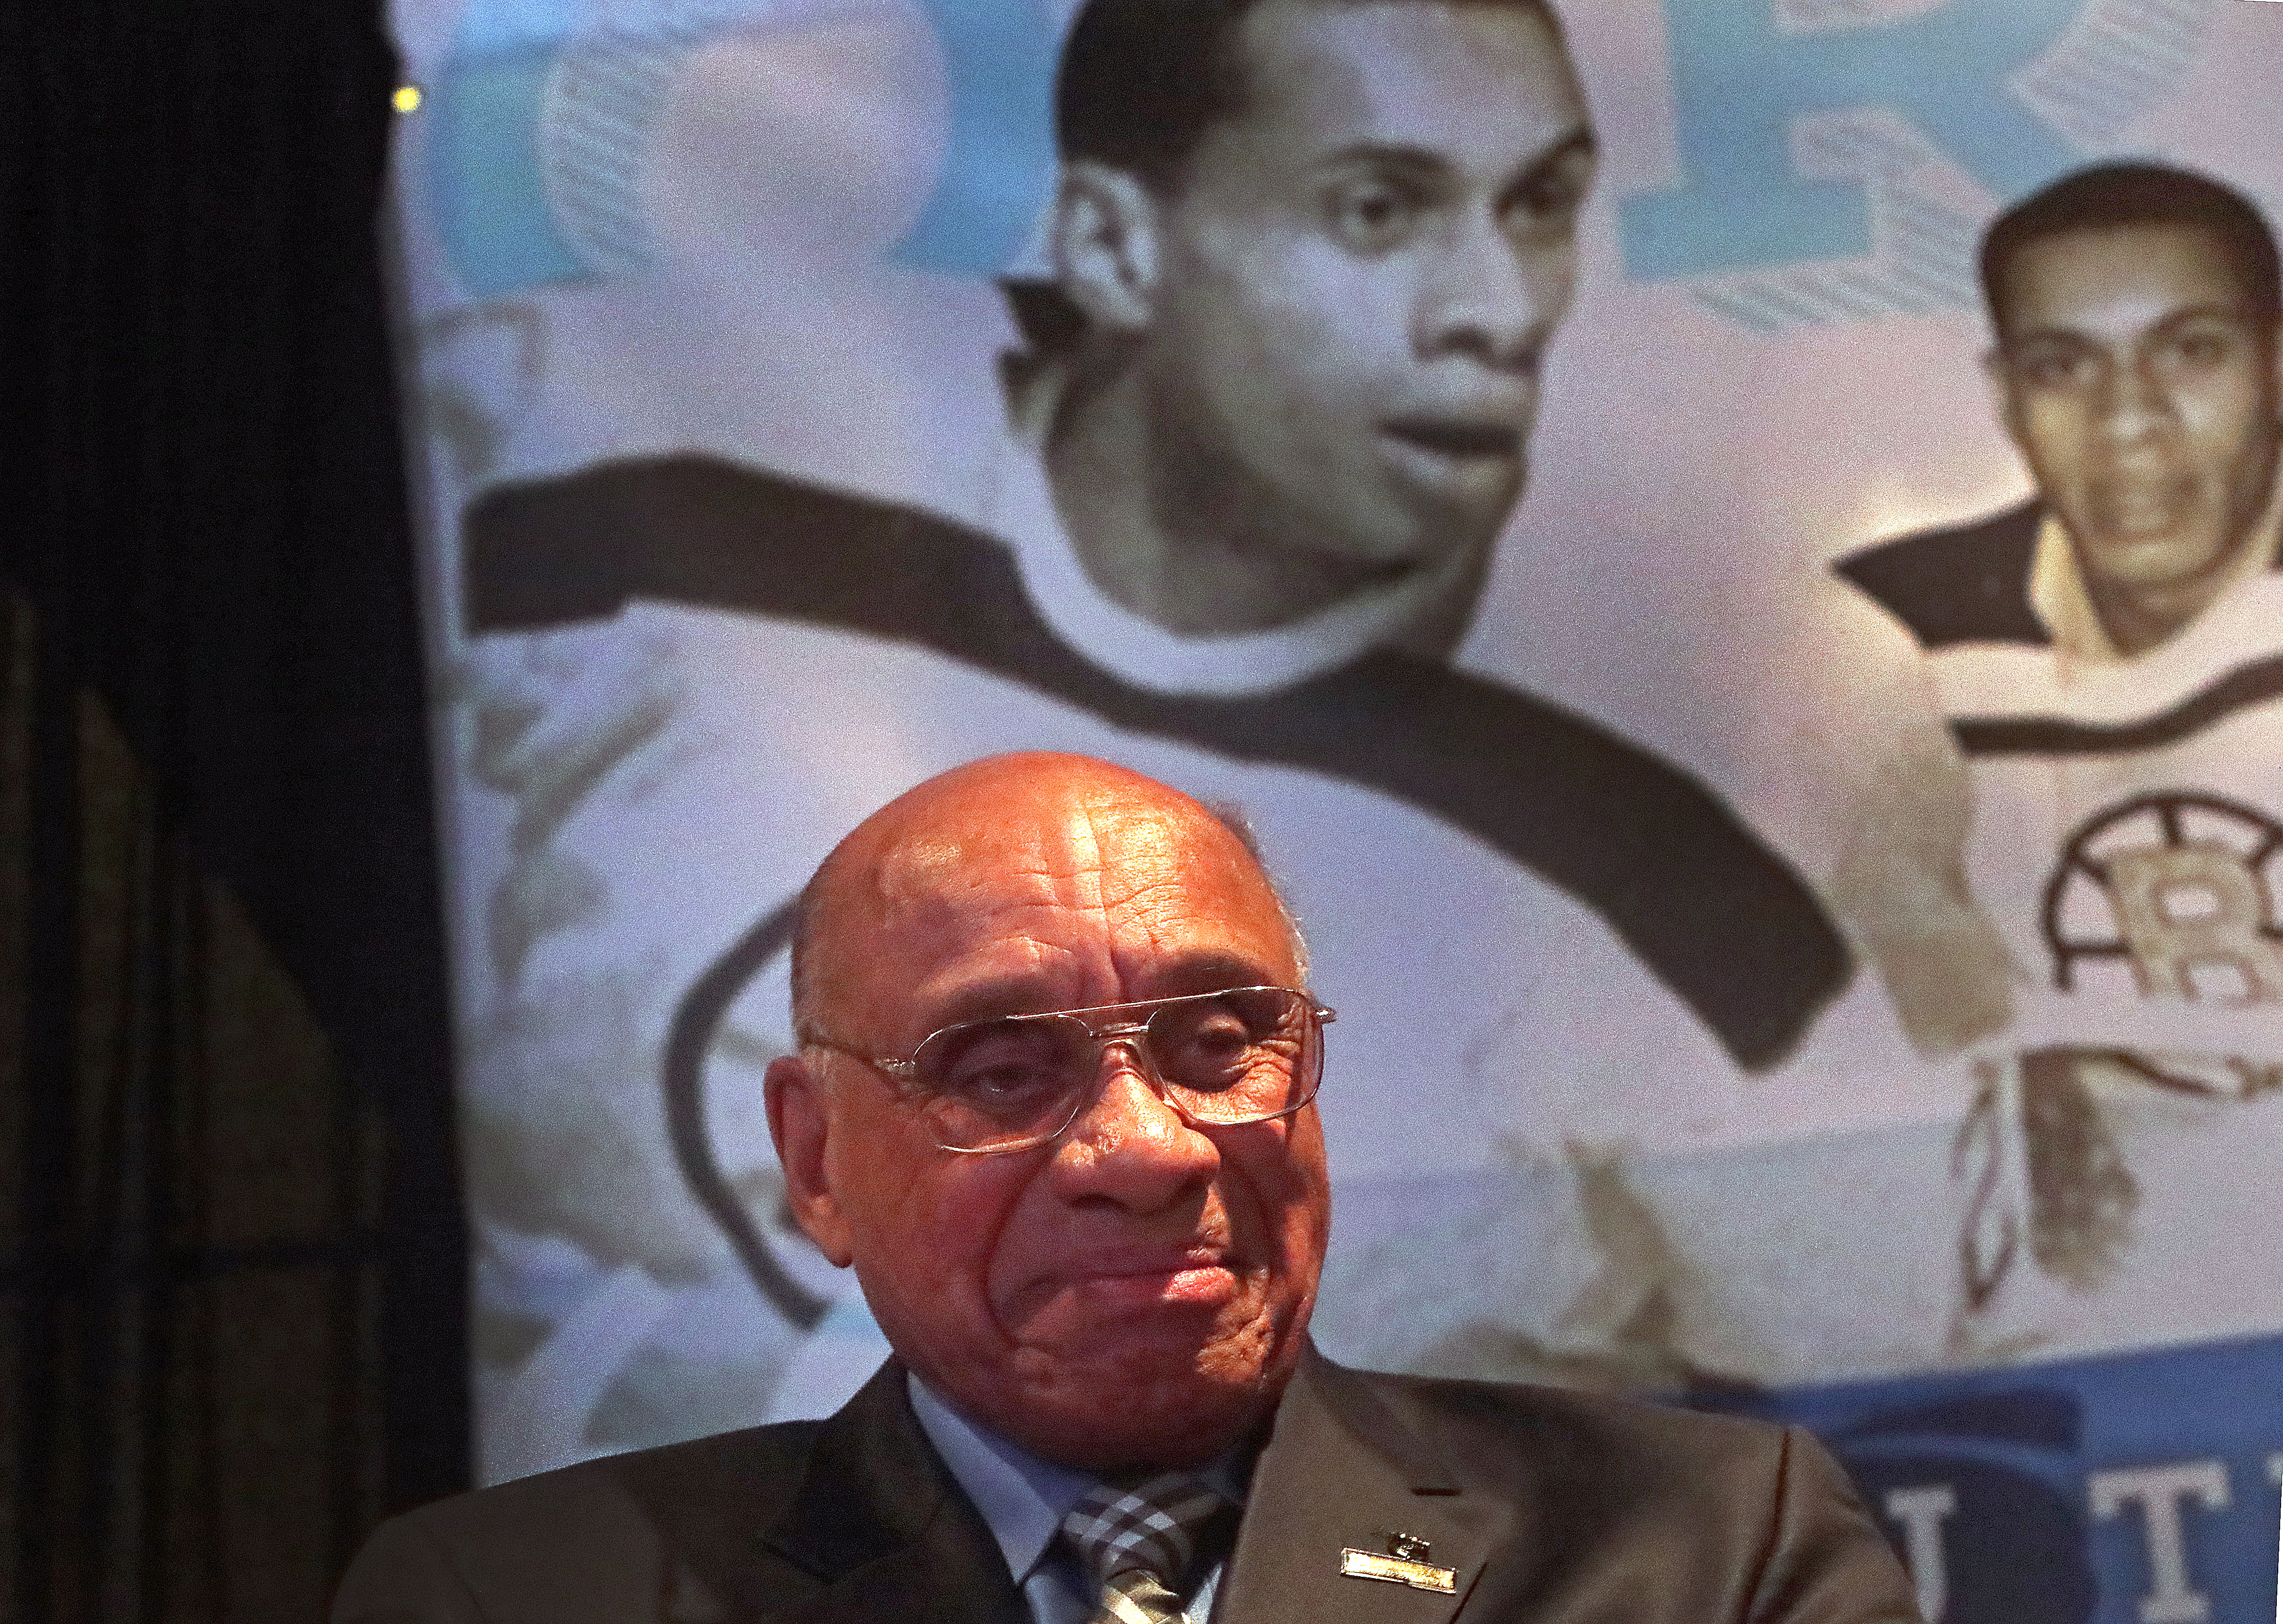 Willie O'Ree's hockey jersey is retired, 64 years after he broke